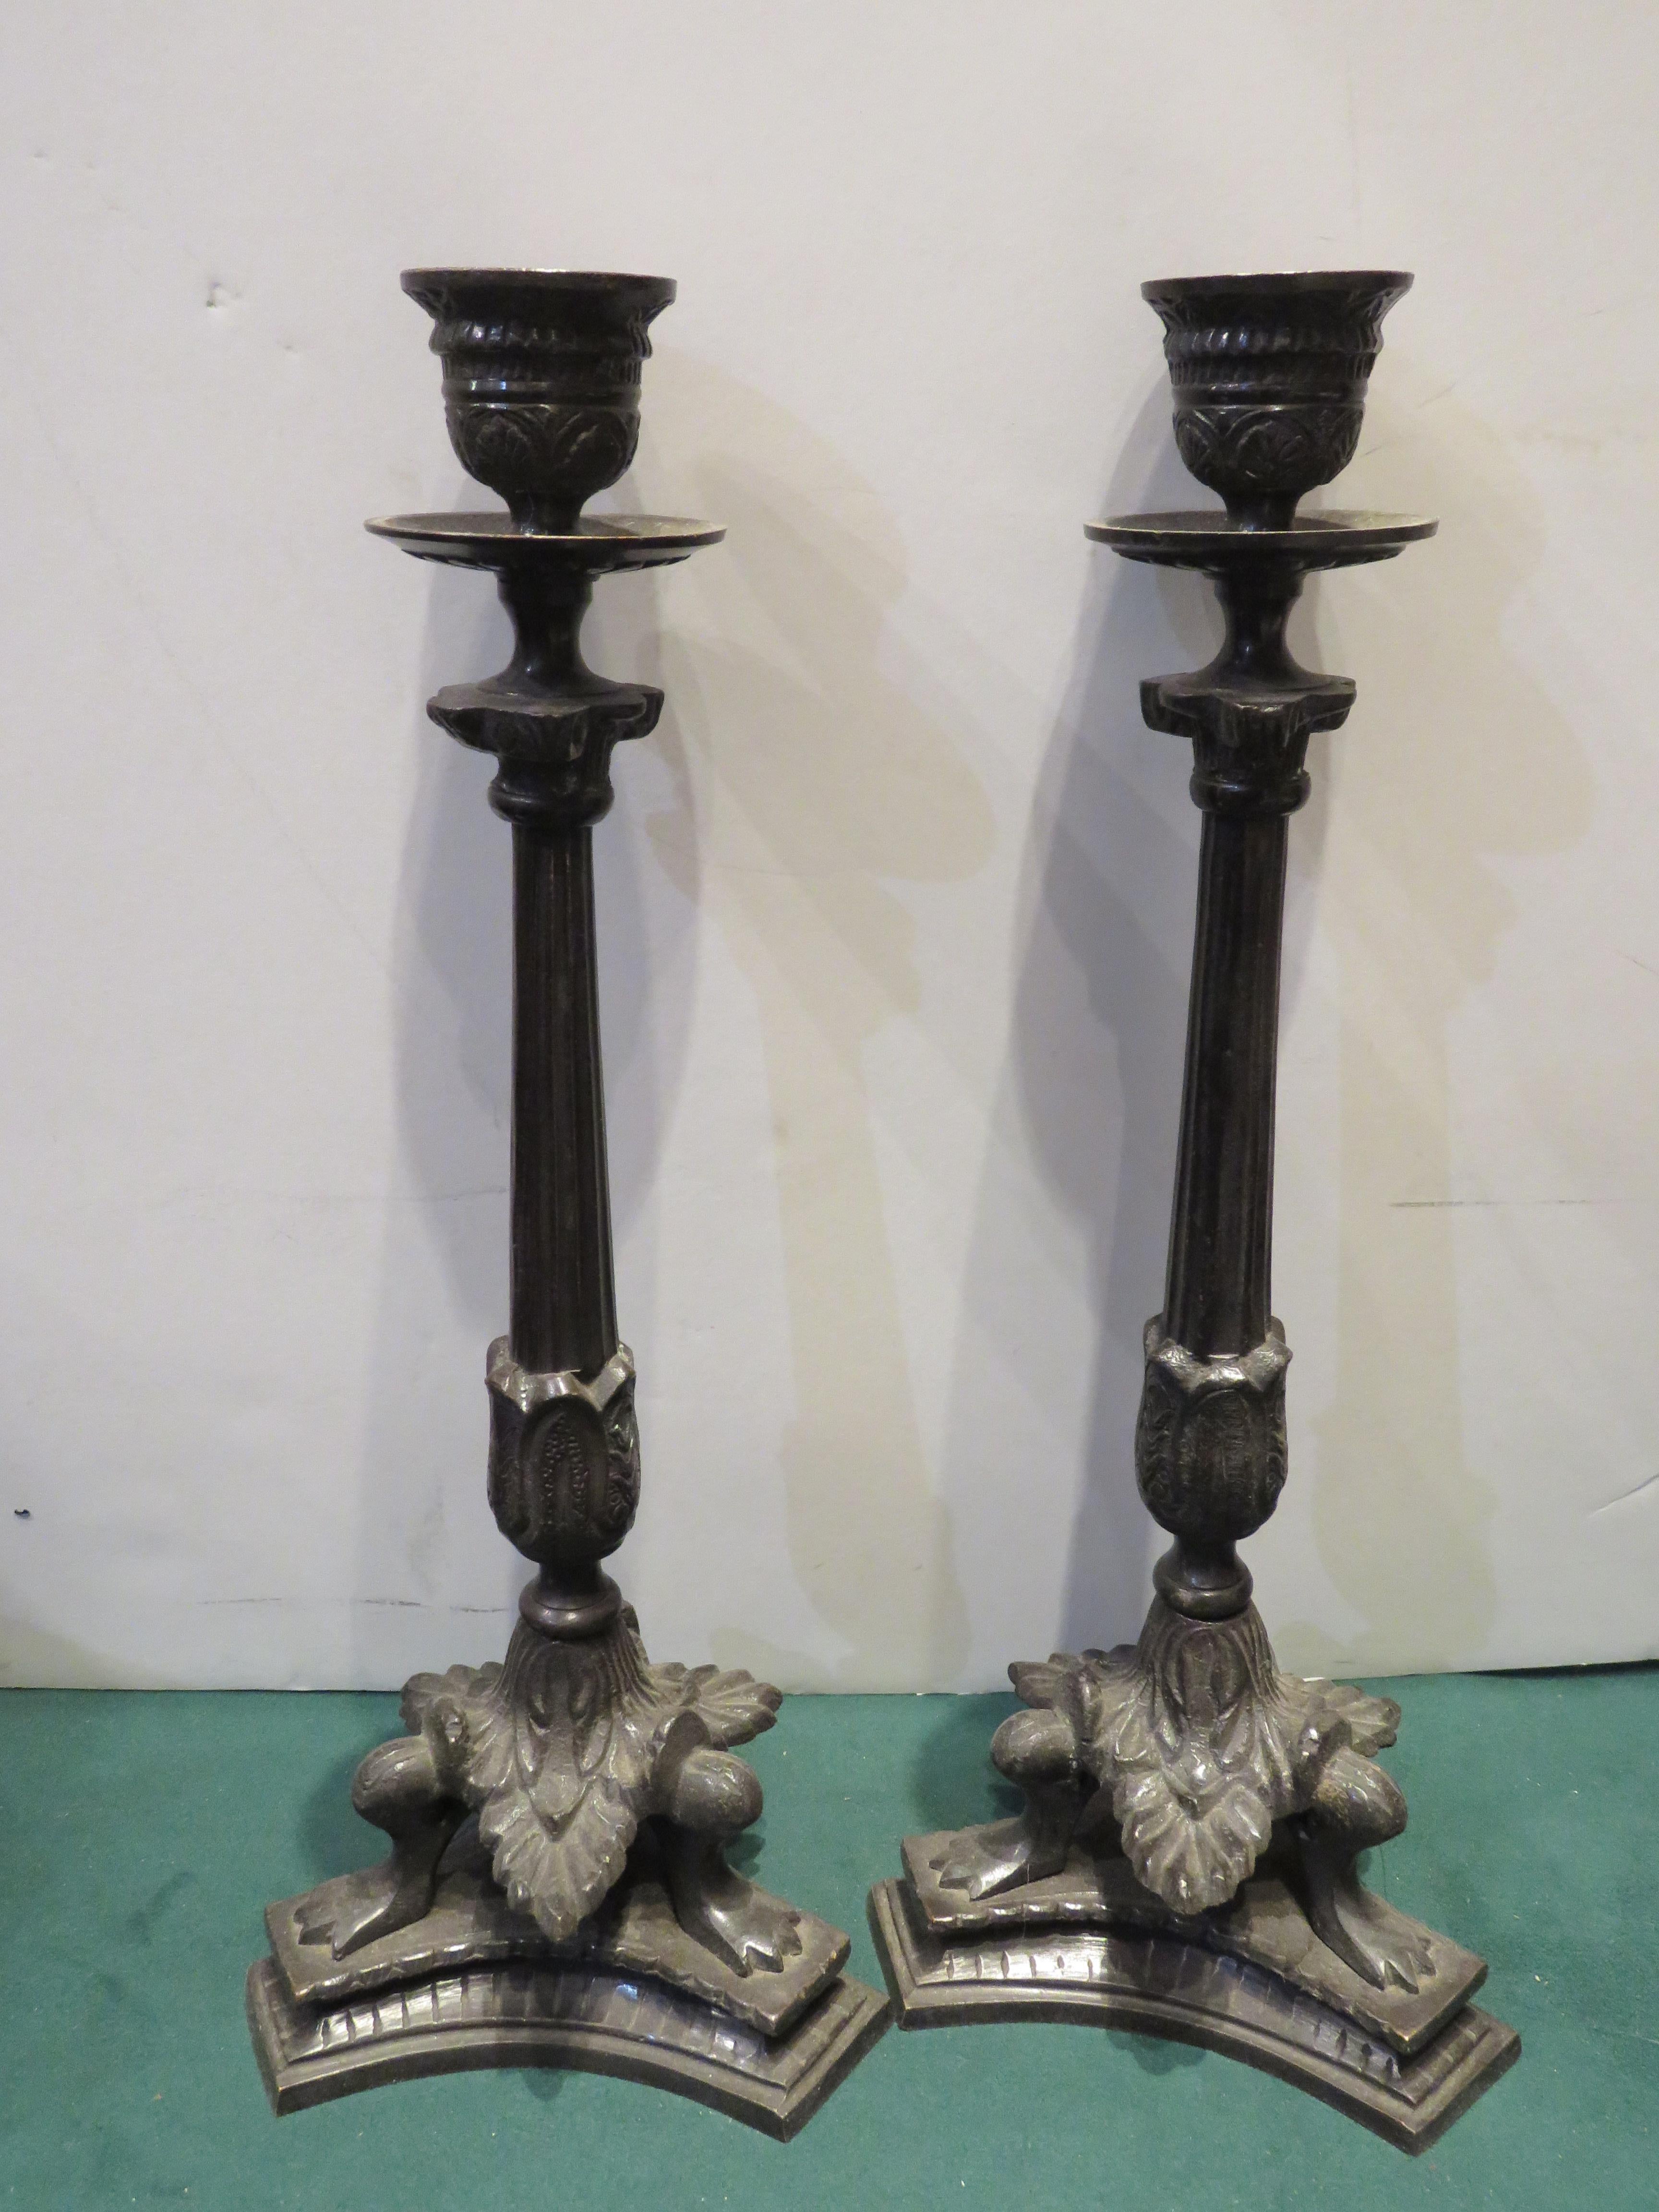 The Following Item we are offering is A Rare Pair of One of a Kind Estate Gilt Bronze Frog Leg Candlesticks. Each Candlestick has Three Frog Legs surrounding. A Pair of Gorgeous Pieces!
Original Gallery Price $3500.

Provenance: Taken out a Several